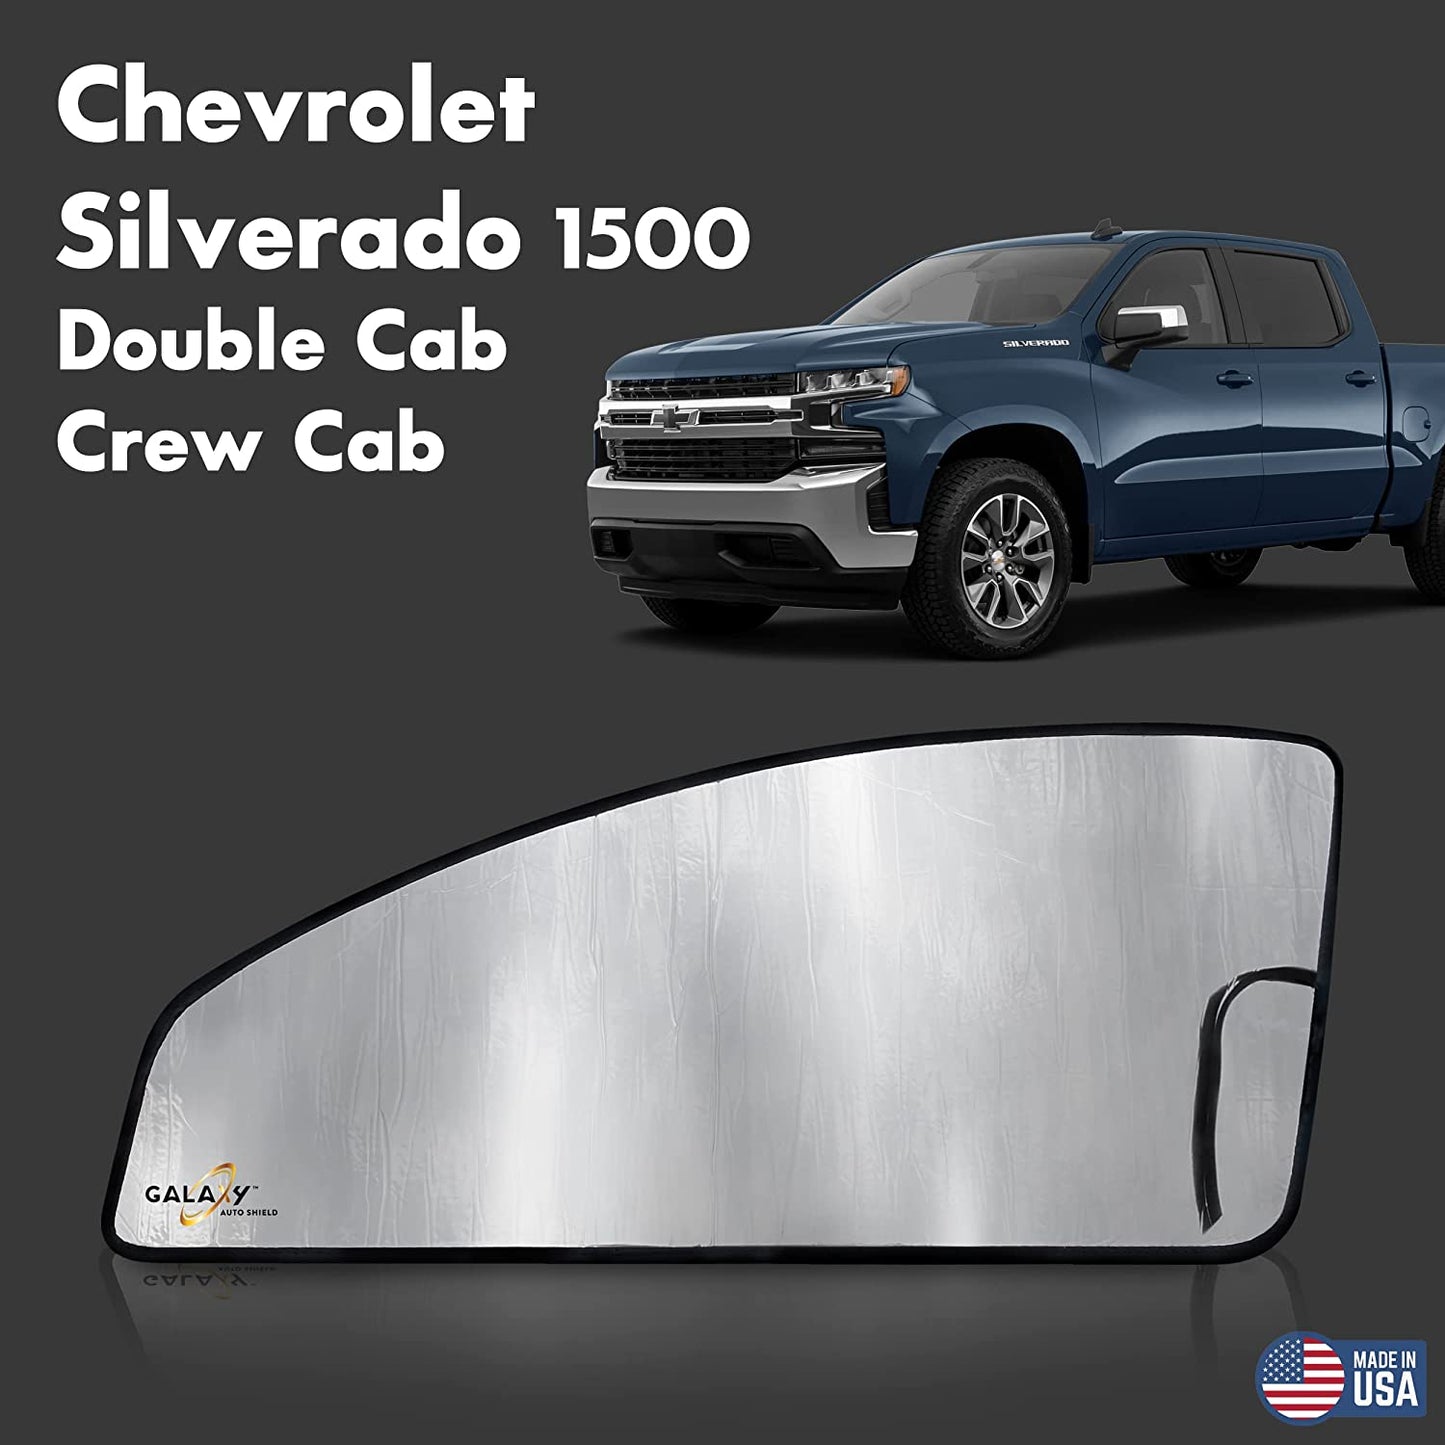 Custom Fit Windshield Sun Shade for 2019 2020 2021 2022 Chevrolet Silverado 1500 2500 3500, 2Dr 4Dr, Insulated Window Sunshade Privacy Accessories Blockout UV Reflector Protection - Made in USA